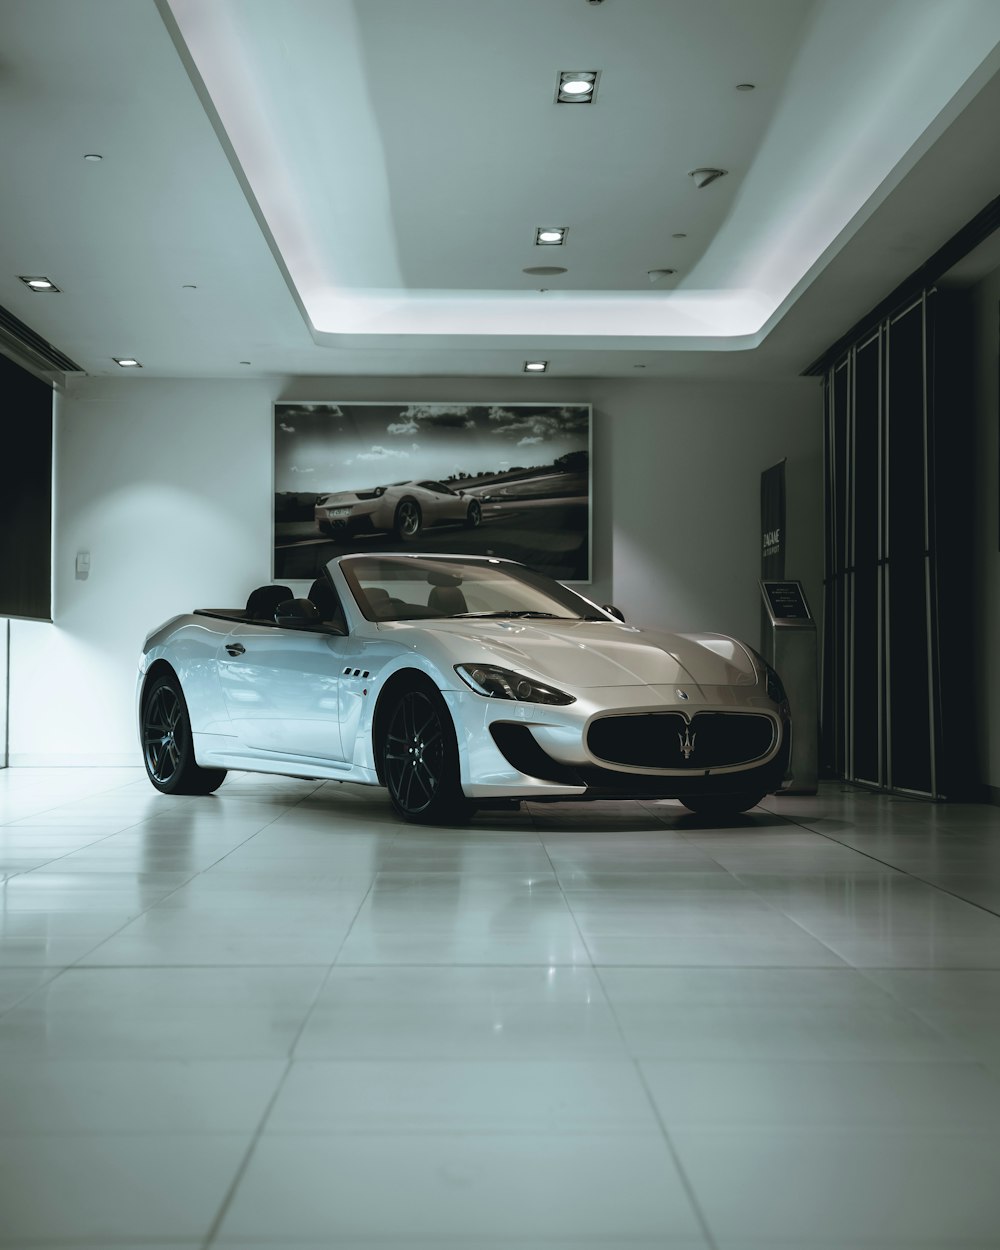 a white masera parked in a large room